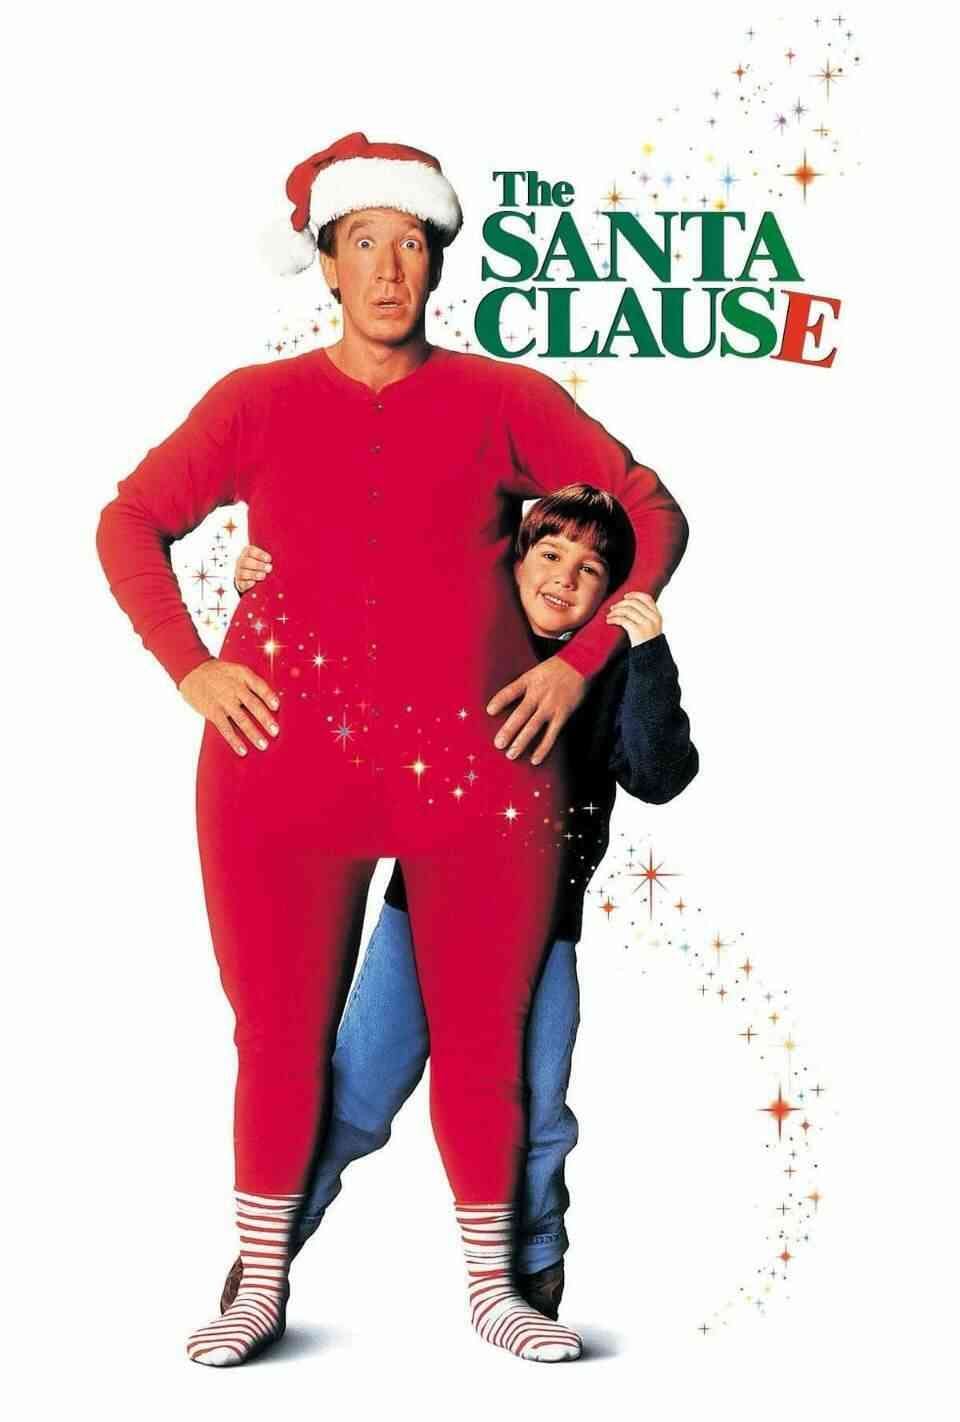 Read The Santa Clause screenplay (poster)